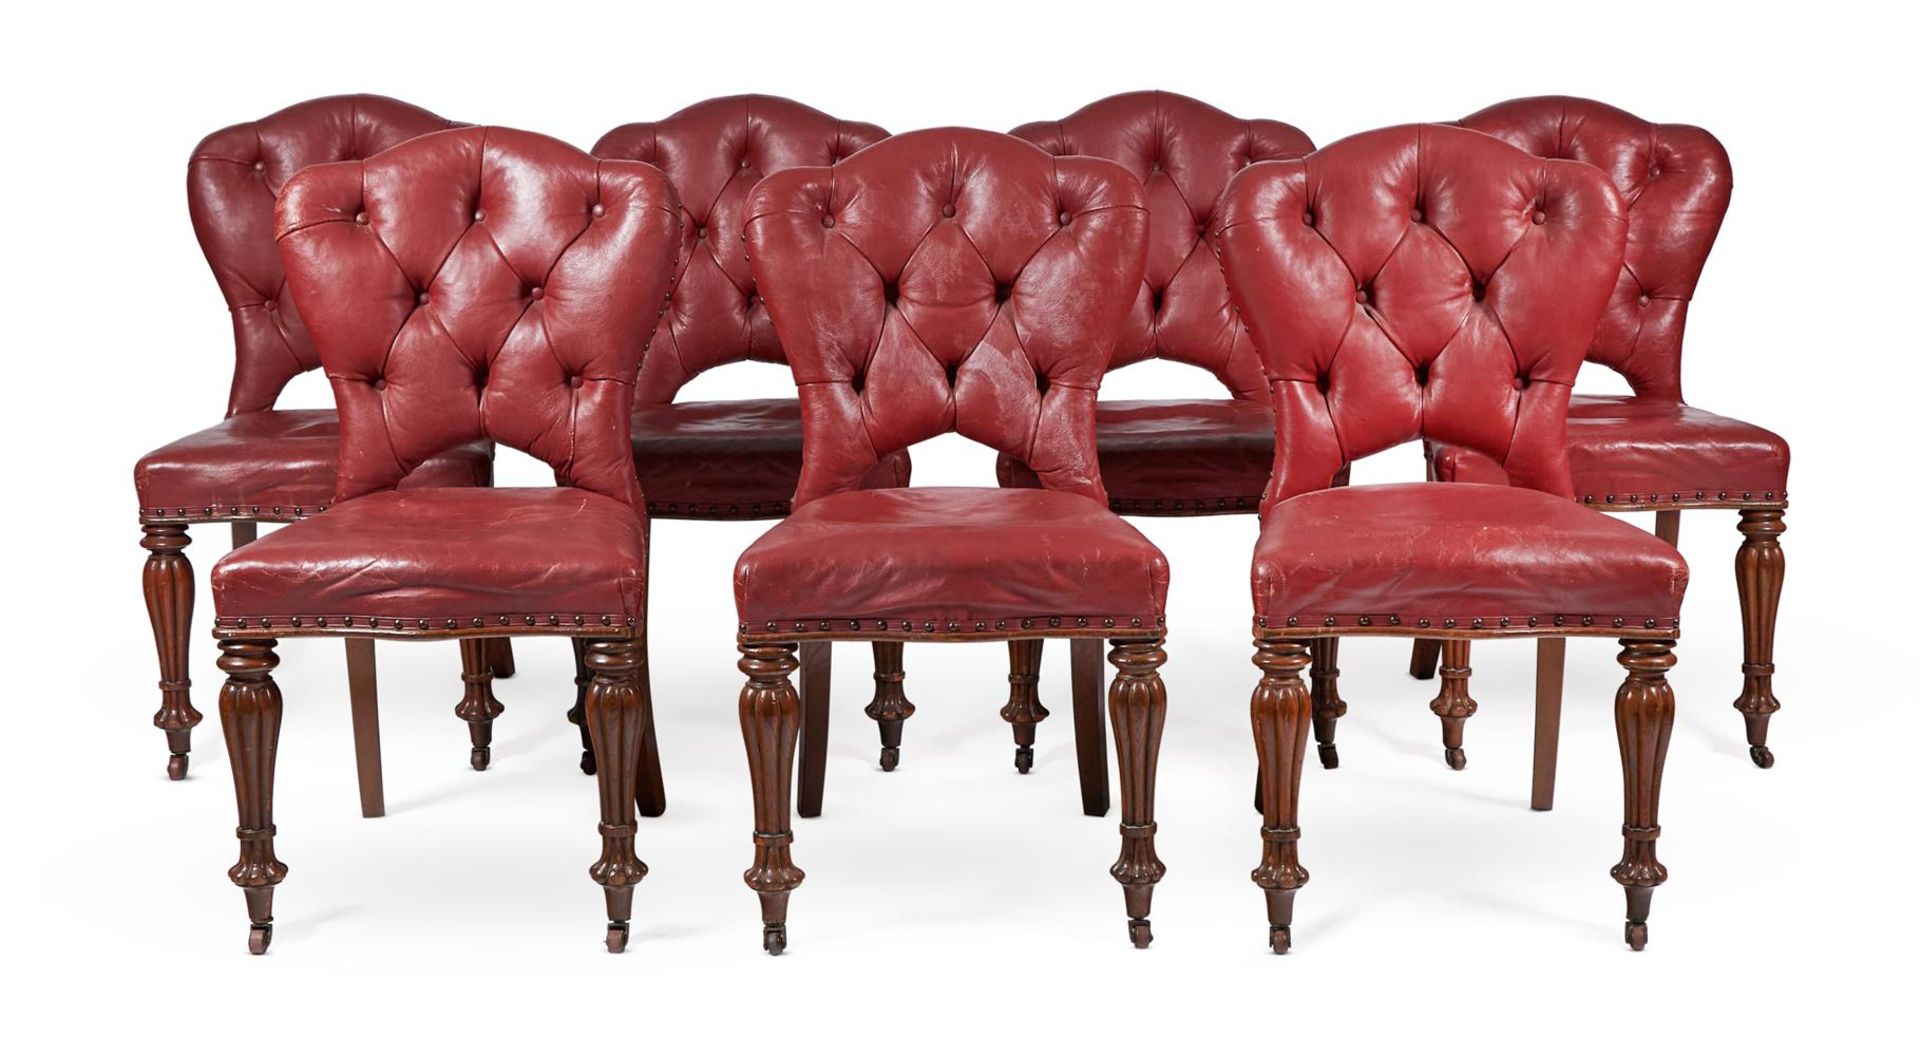 A SET OF EIGHT EARLY VICTORIAN OAK AND RED LEATHER DINING CHAIRS MID 19TH CENTURY - Image 2 of 5